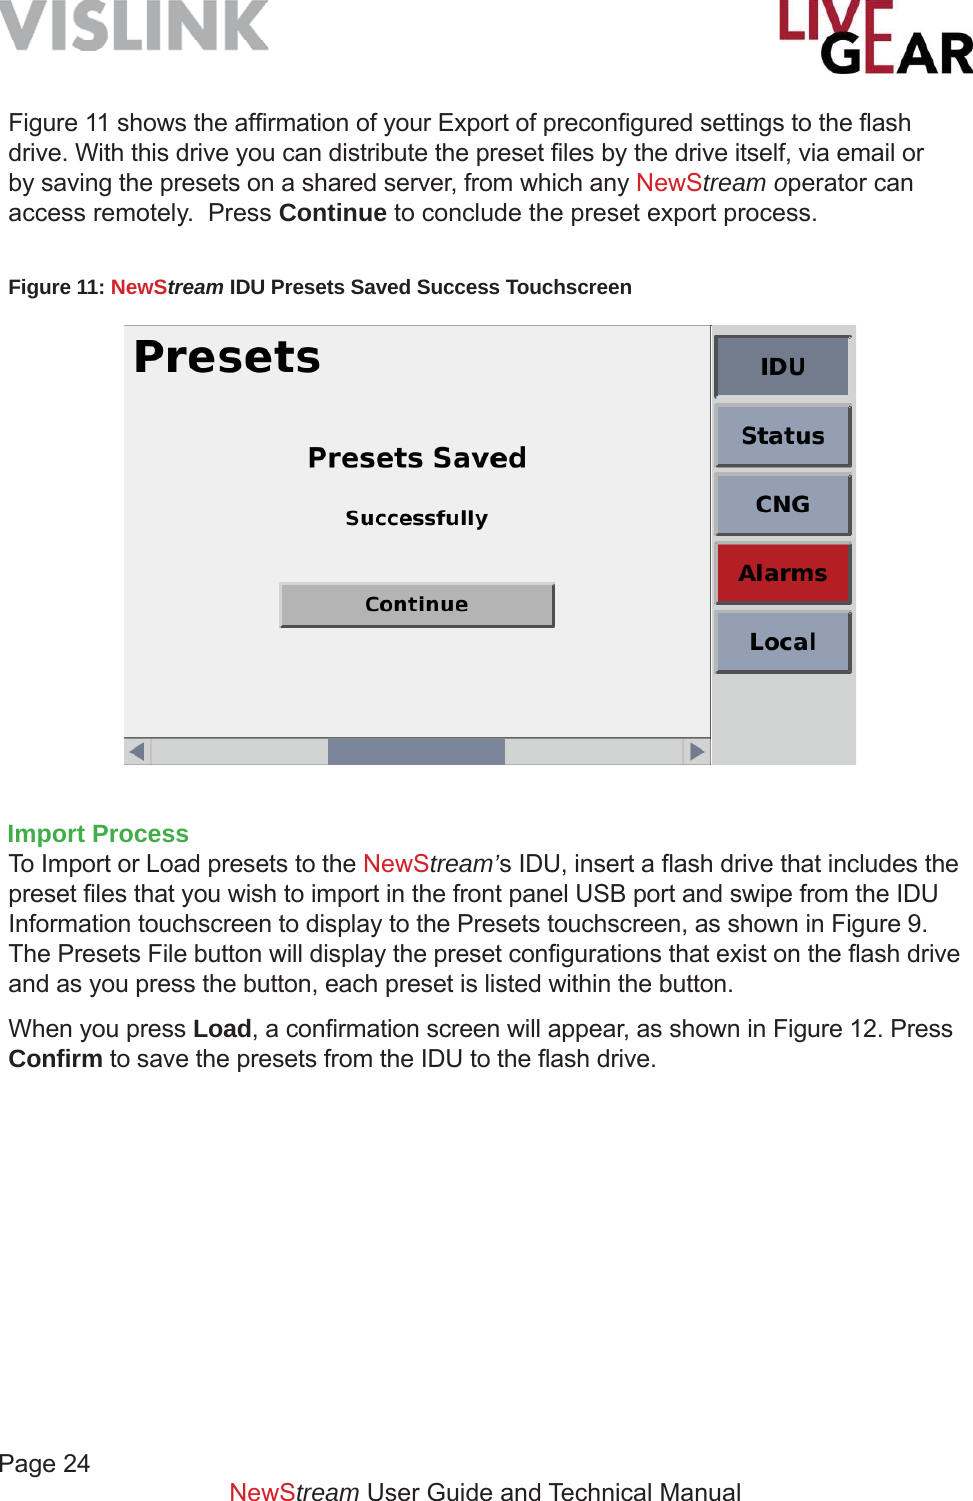 Page 24         NewStream User Guide and Technical ManualFigure 11: NewStream IDU Presets Saved Success Touchscreen Figure 11 shows the afﬁ rmation of your Export of preconﬁ gured settings to the ﬂ ash drive. With this drive you can distribute the preset ﬁ les by the drive itself, via email or by saving the presets on a shared server, from which any NewStream operator can access remotely.  Press Continue to conclude the preset export process.Import ProcessTo Import or Load presets to the NewStream’s IDU, insert a ﬂ ash drive that includes the preset ﬁ les that you wish to import in the front panel USB port and swipe from the IDU Information touchscreen to display to the Presets touchscreen, as shown in Figure 9.  The Presets File button will display the preset conﬁ gurations that exist on the ﬂ ash drive and as you press the button, each preset is listed within the button. When you press Load, a conﬁ rmation screen will appear, as shown in Figure 12. Press Conﬁ rm to save the presets from the IDU to the ﬂ ash drive.